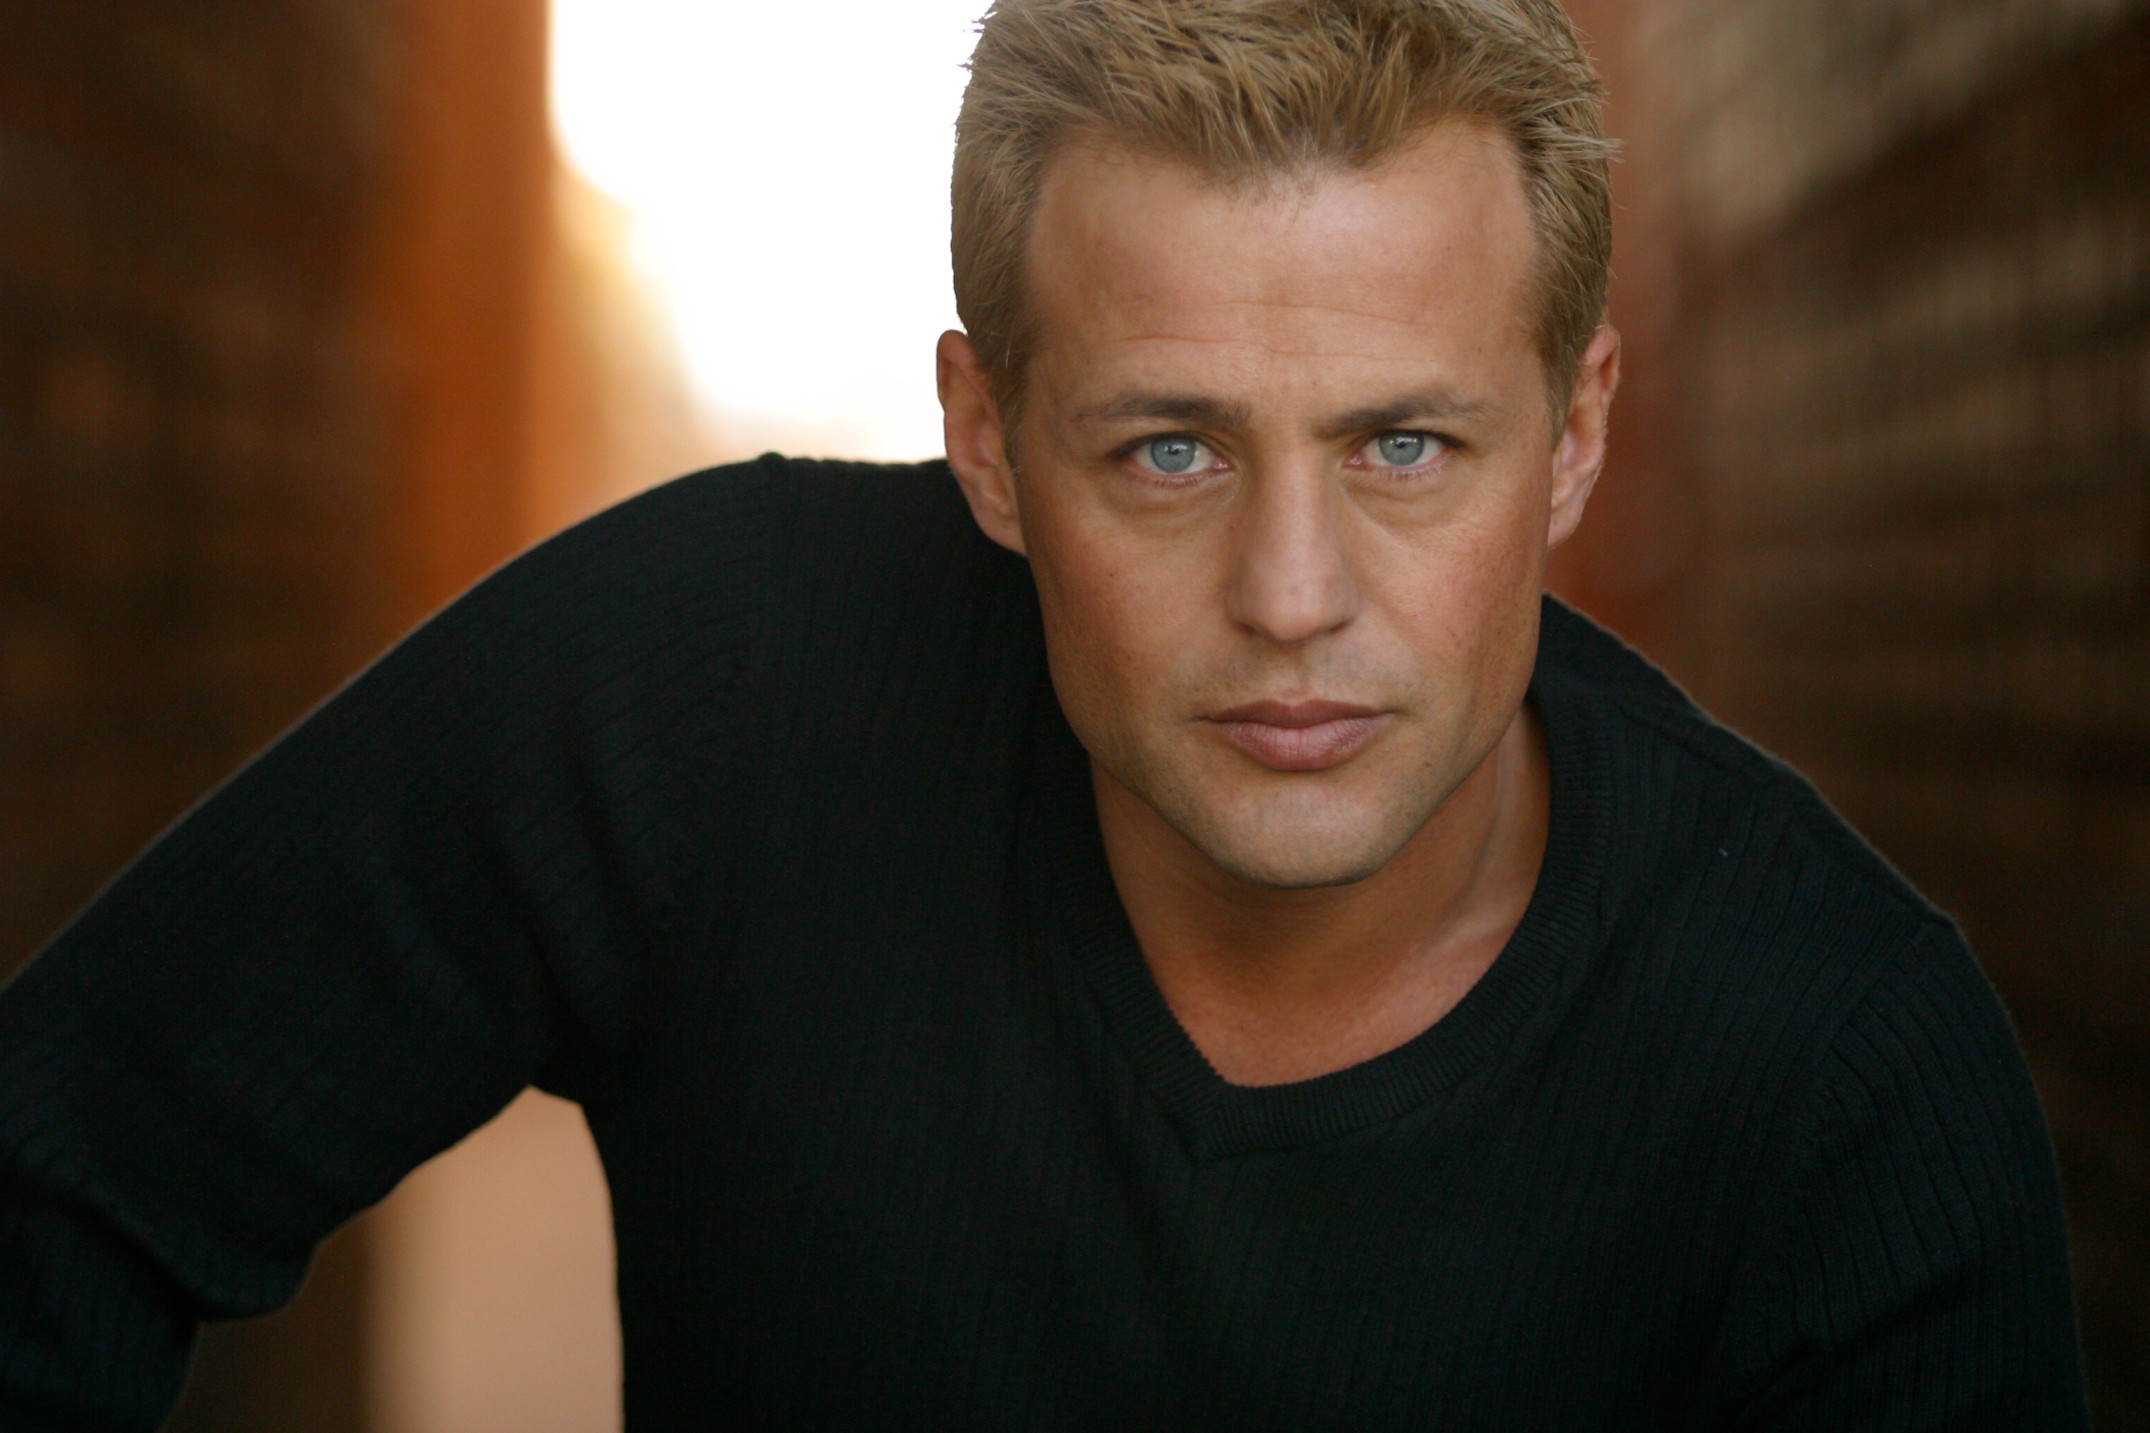 How tall is Louis Mandylor?